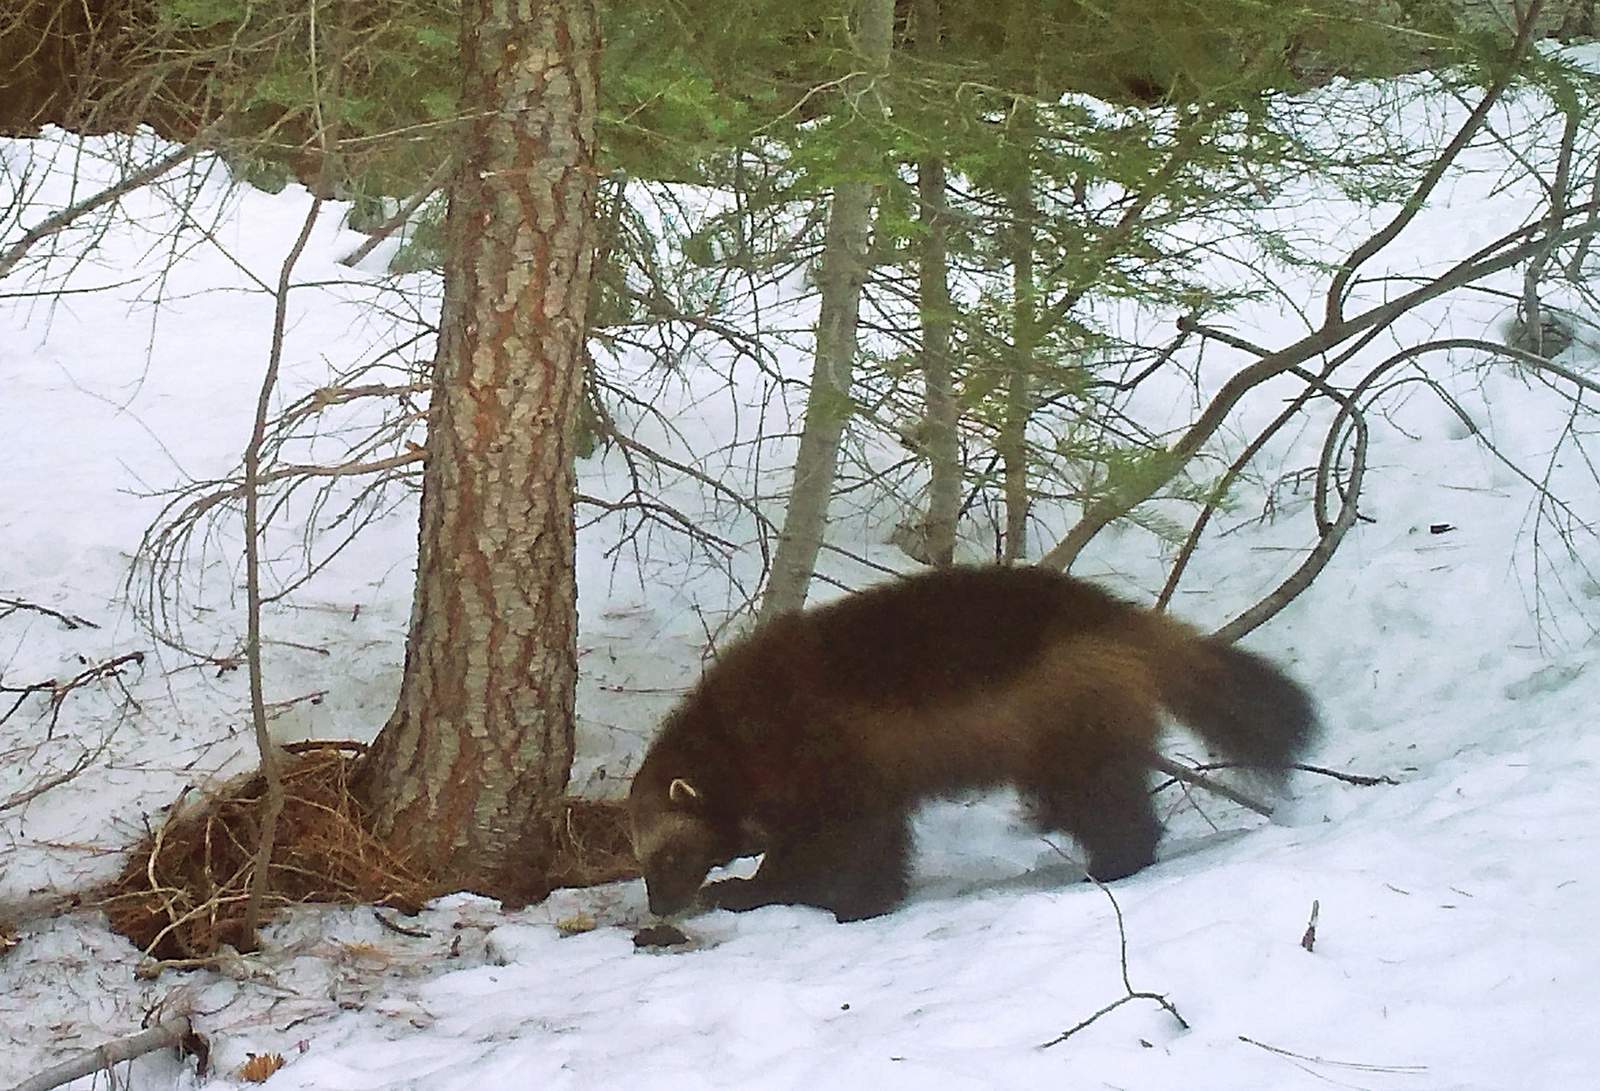 US officials: Climate change not a threat to rare wolverine - WSLS 10